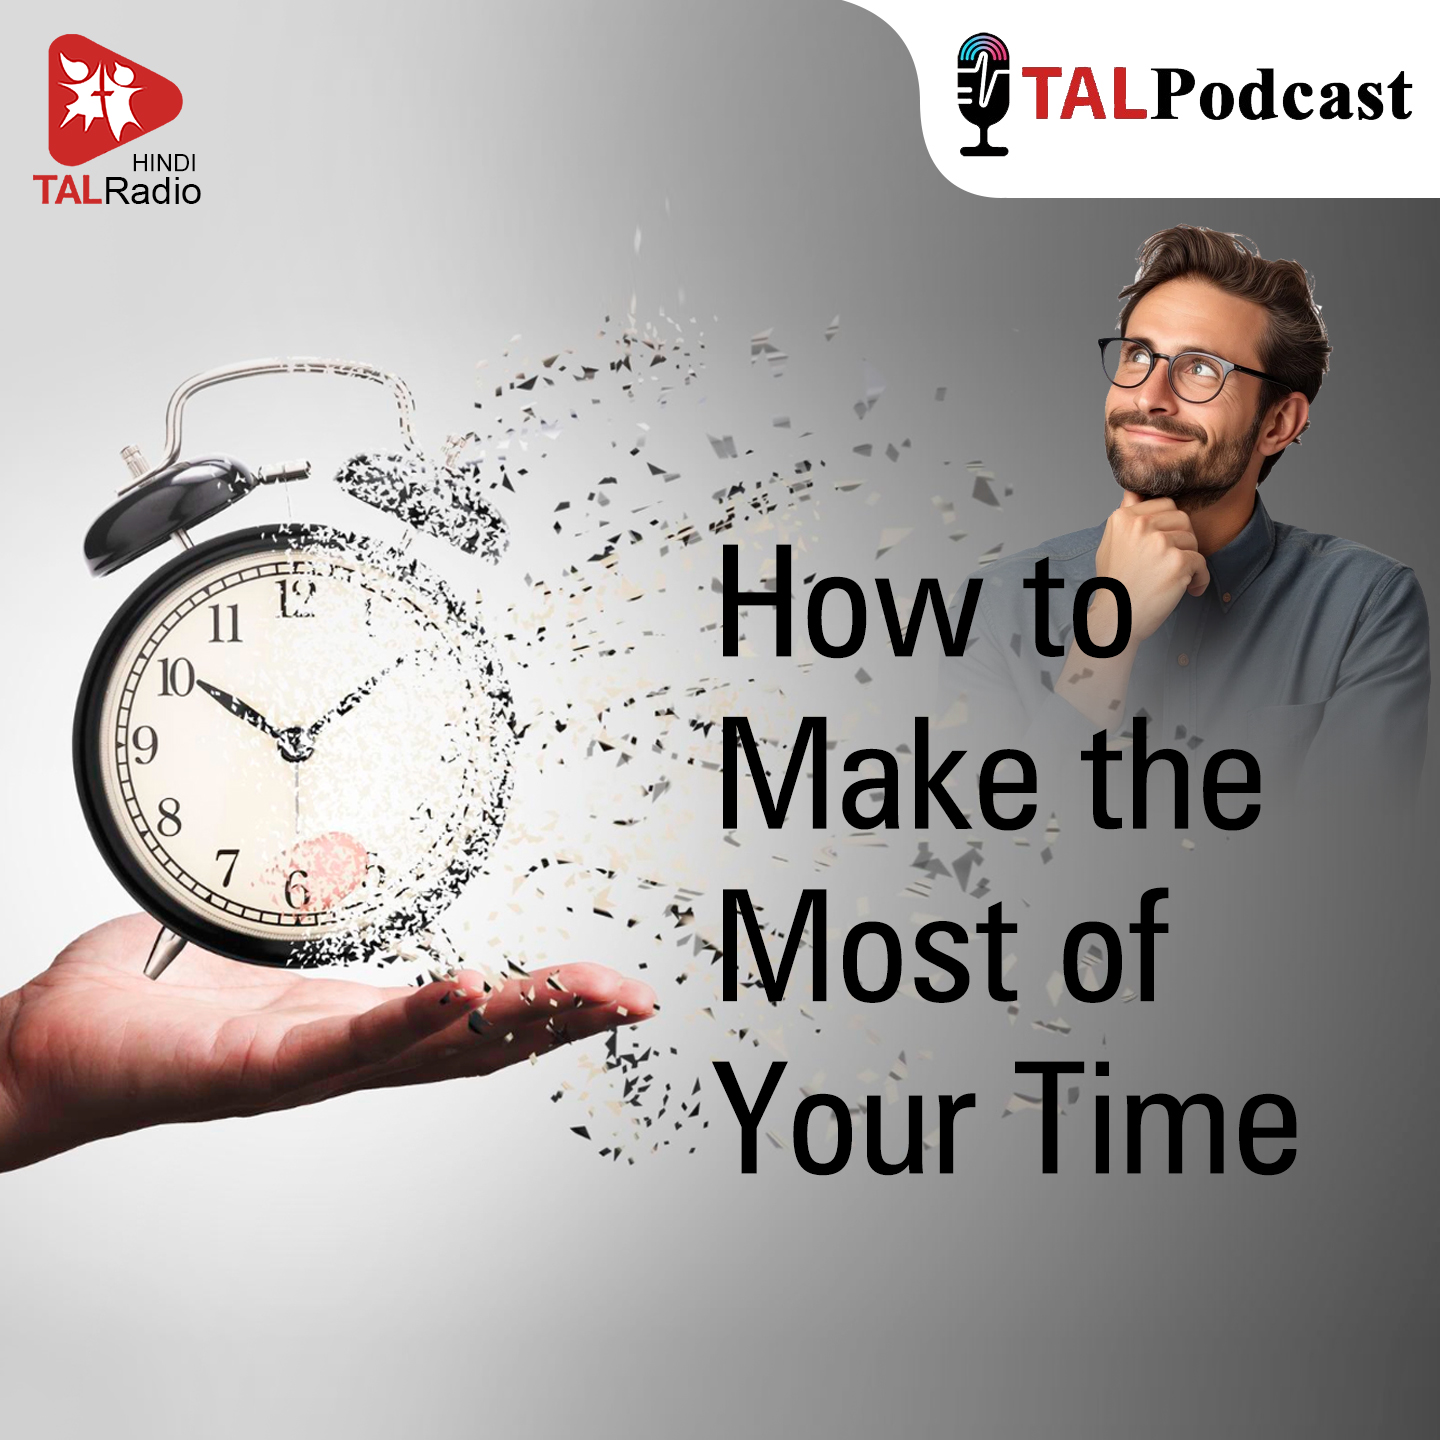 How to Make the Most of Your Time